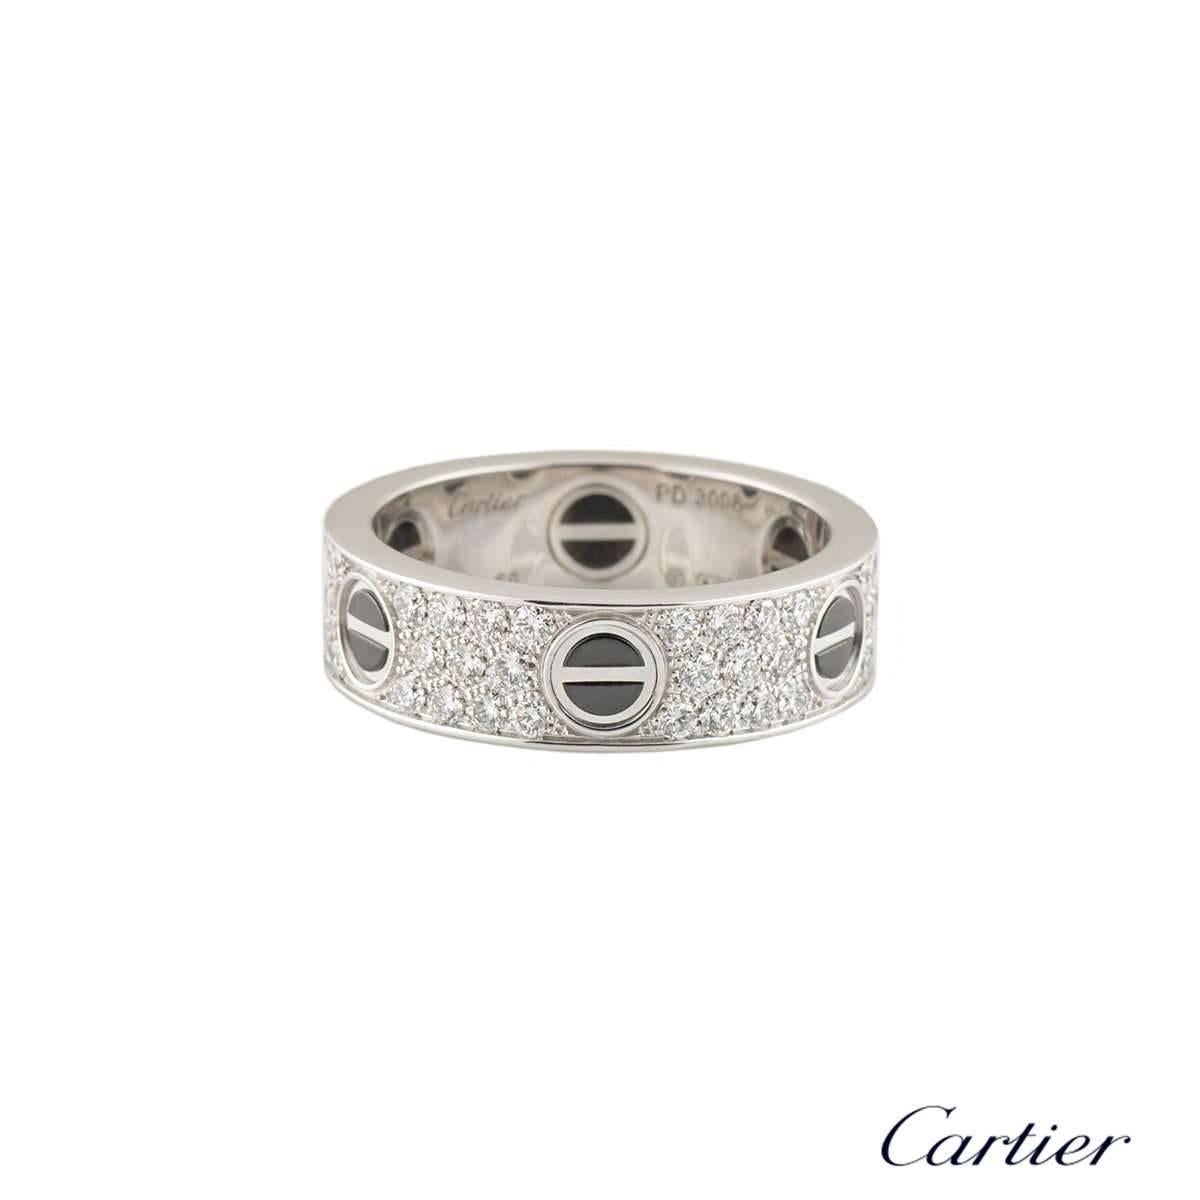 An 18k white gold diamond set Love ring by Cartier. The ring features the classic screw motif, featuring a ceramic inlay, around the outer edge and has 66 pave set, round brilliant cut diamonds set between each screw, totalling 0.74ct. The ring is a